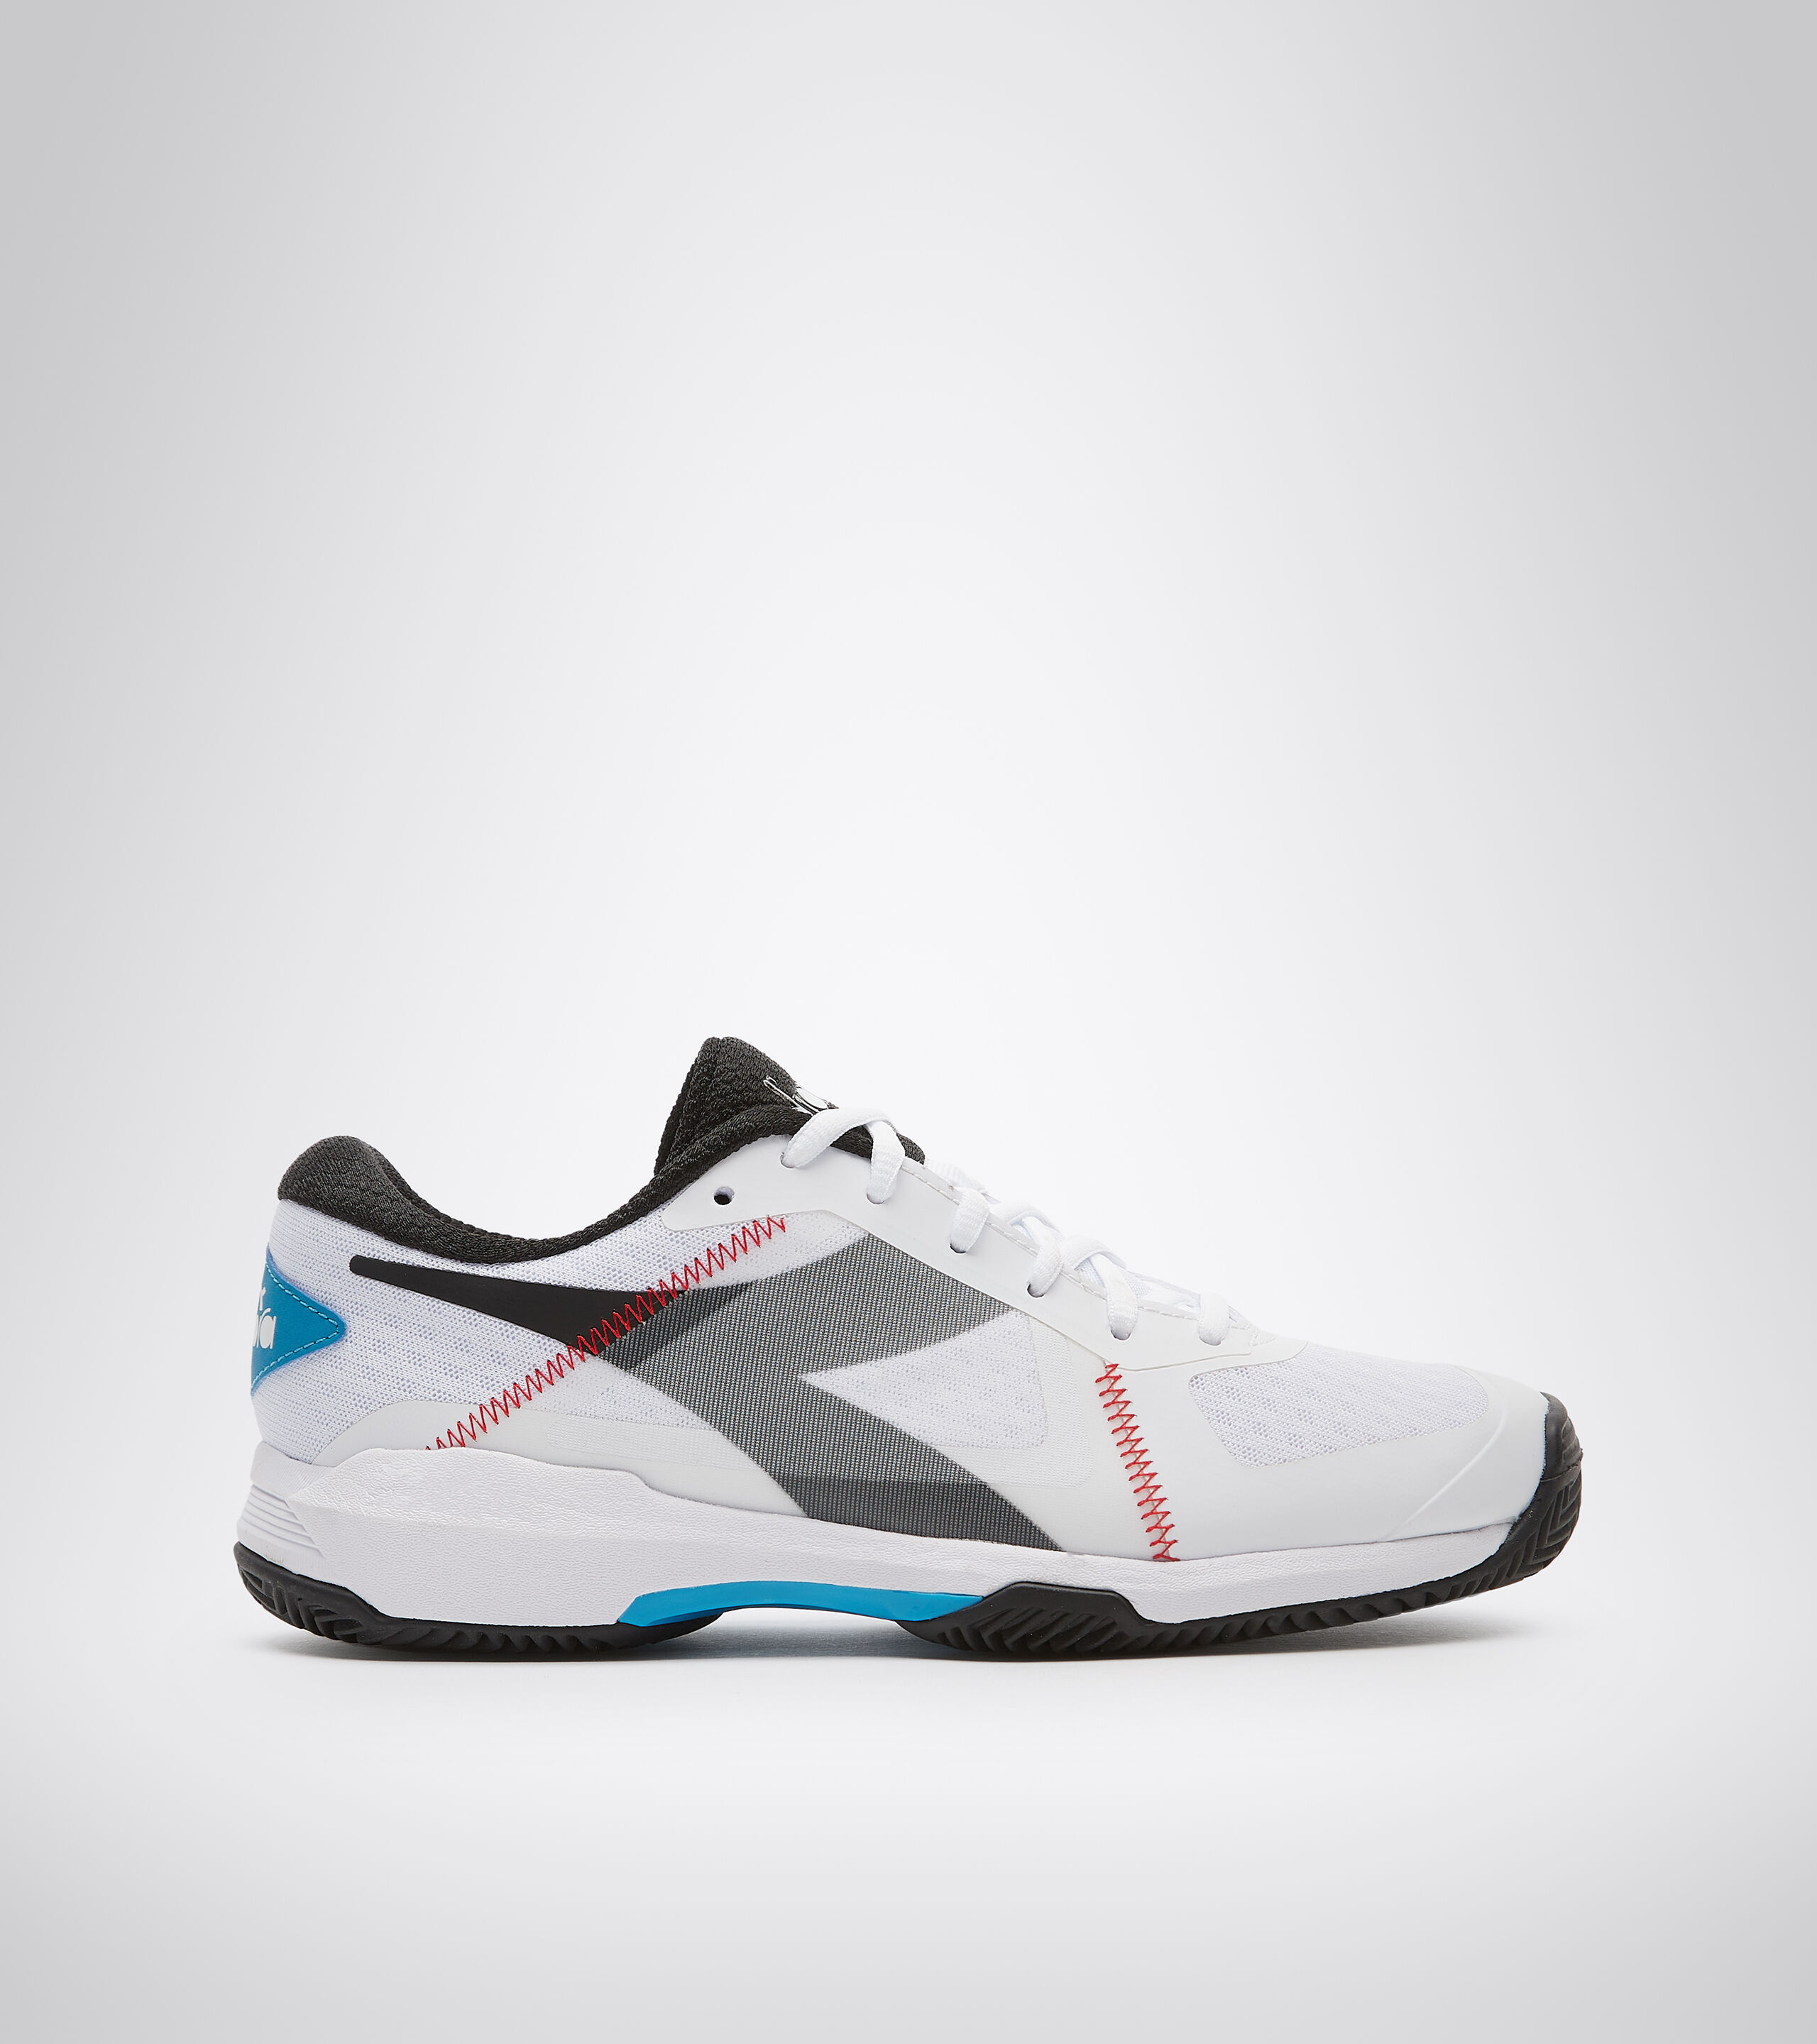 TROFEO CLAY Tennis shoes for clay courts - Men